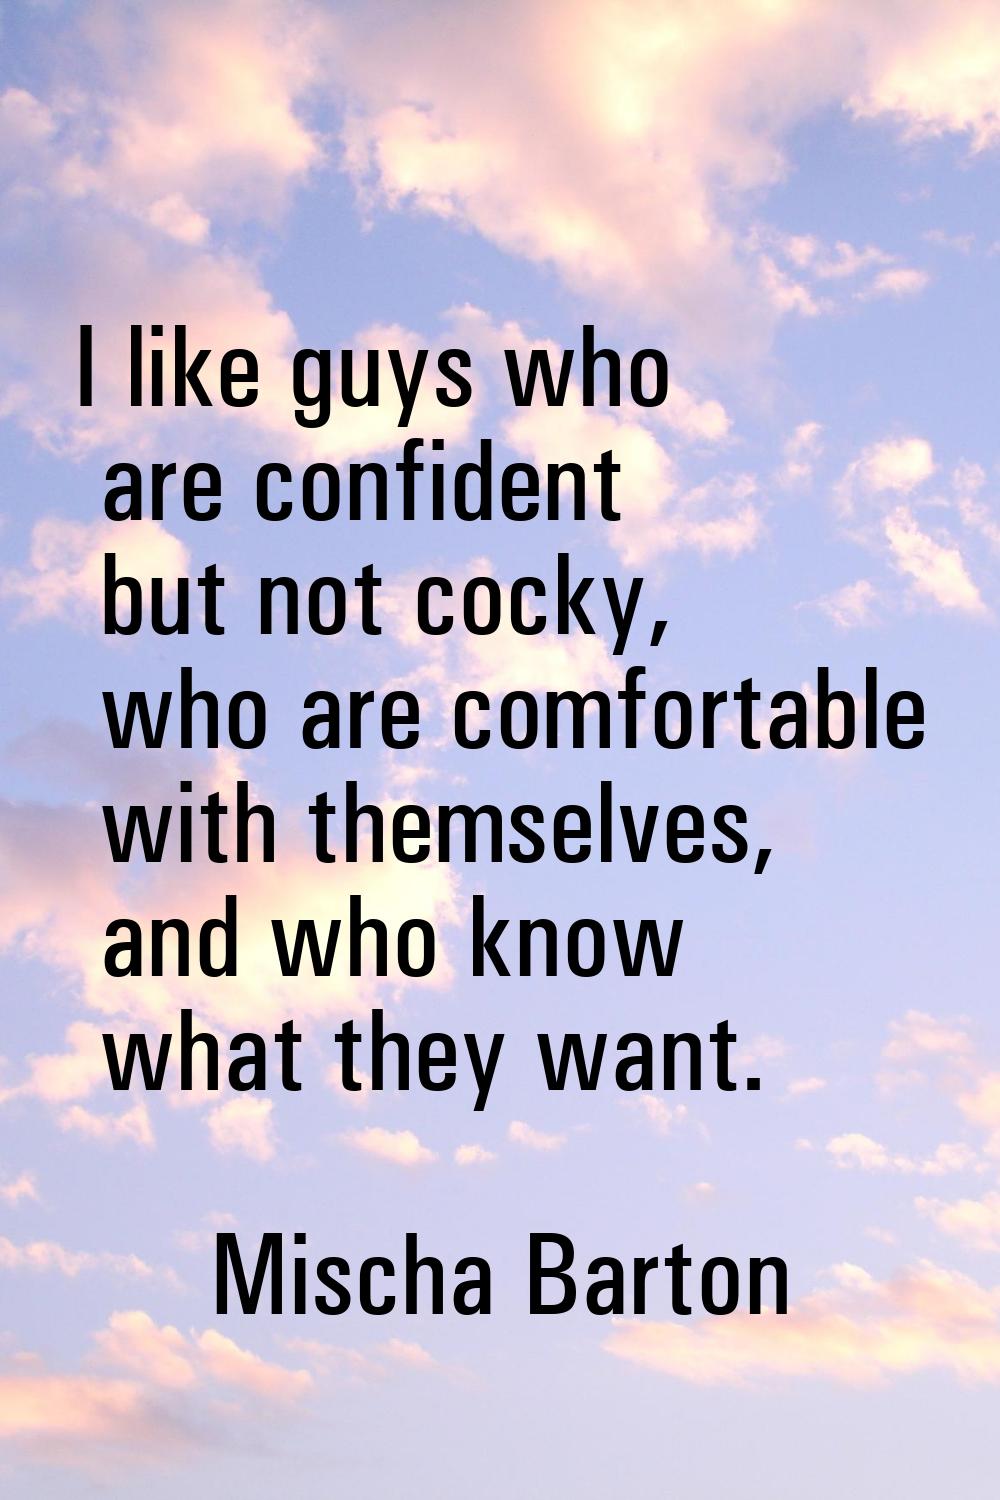 I like guys who are confident but not cocky, who are comfortable with themselves, and who know what